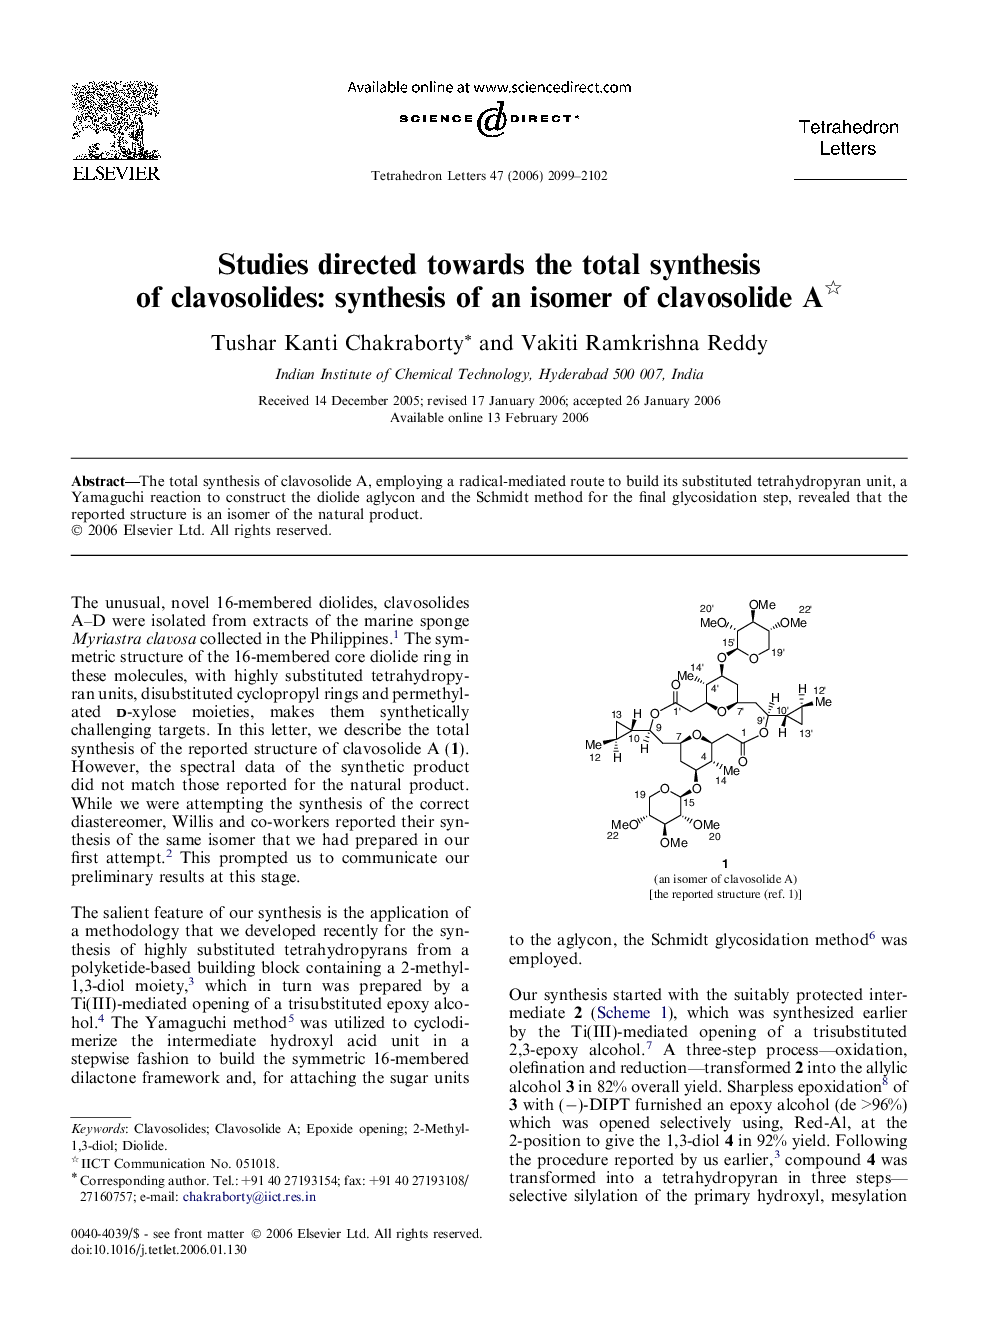 Studies directed towards the total synthesis of clavosolides: synthesis of an isomer of clavosolide A